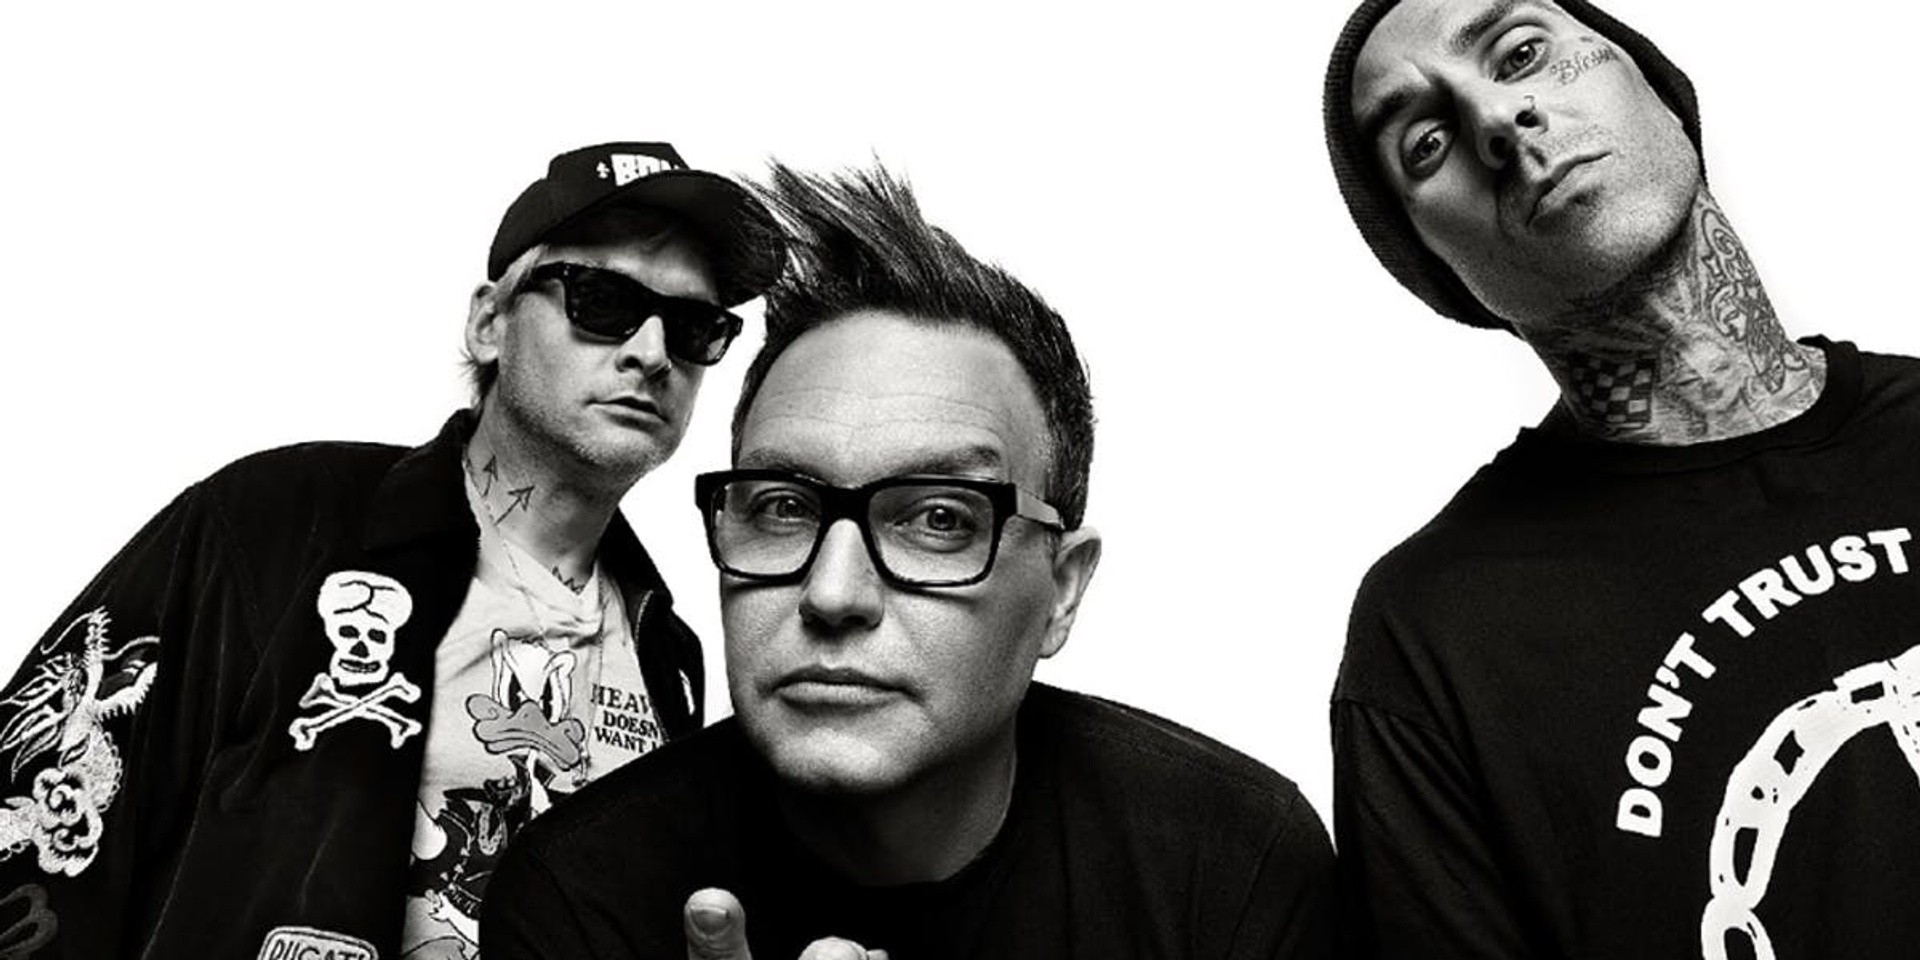 Blink-182 shares new single to mark 182nd day of 2019 – listen